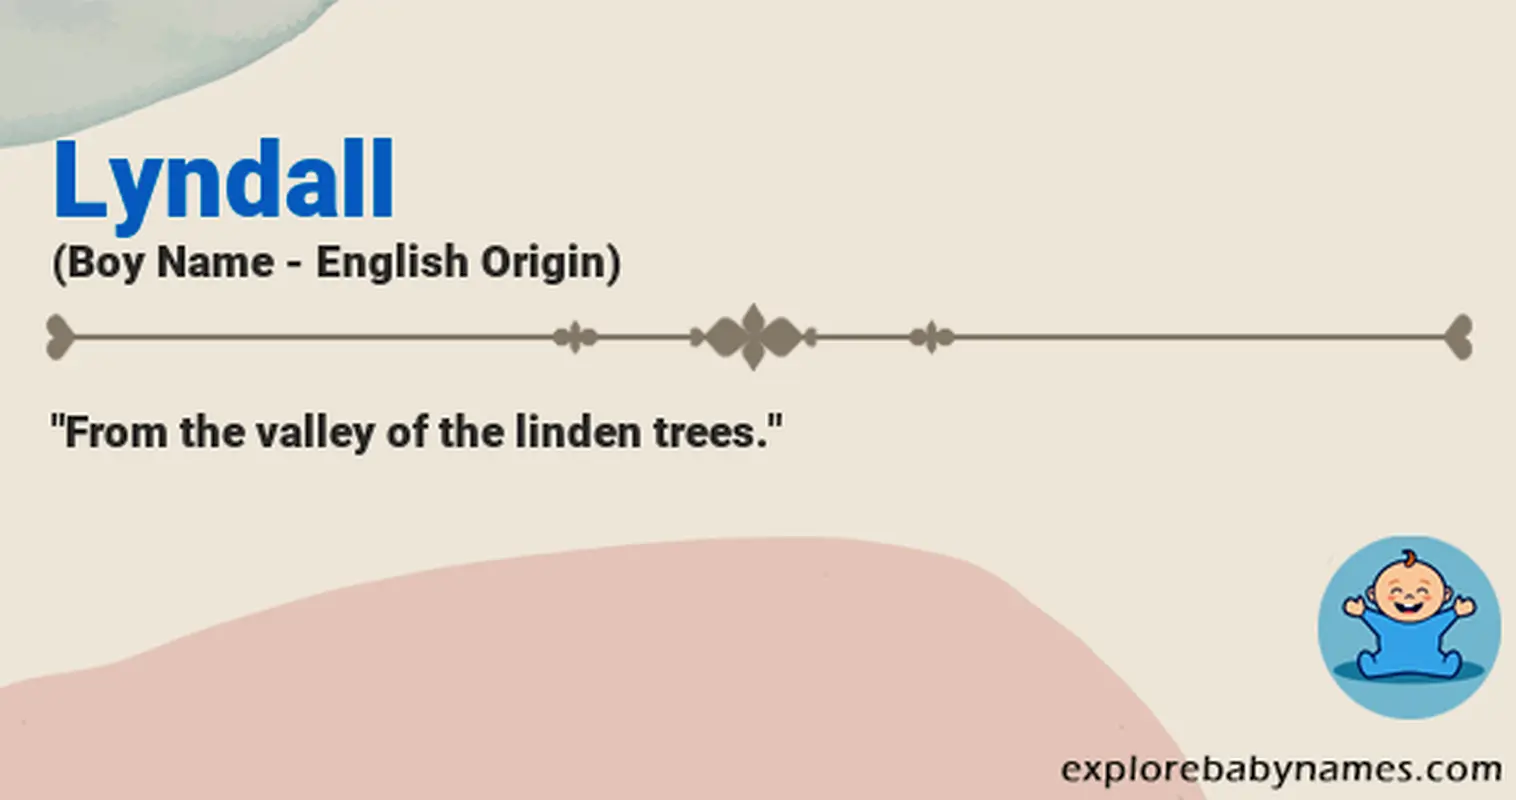 Meaning of Lyndall